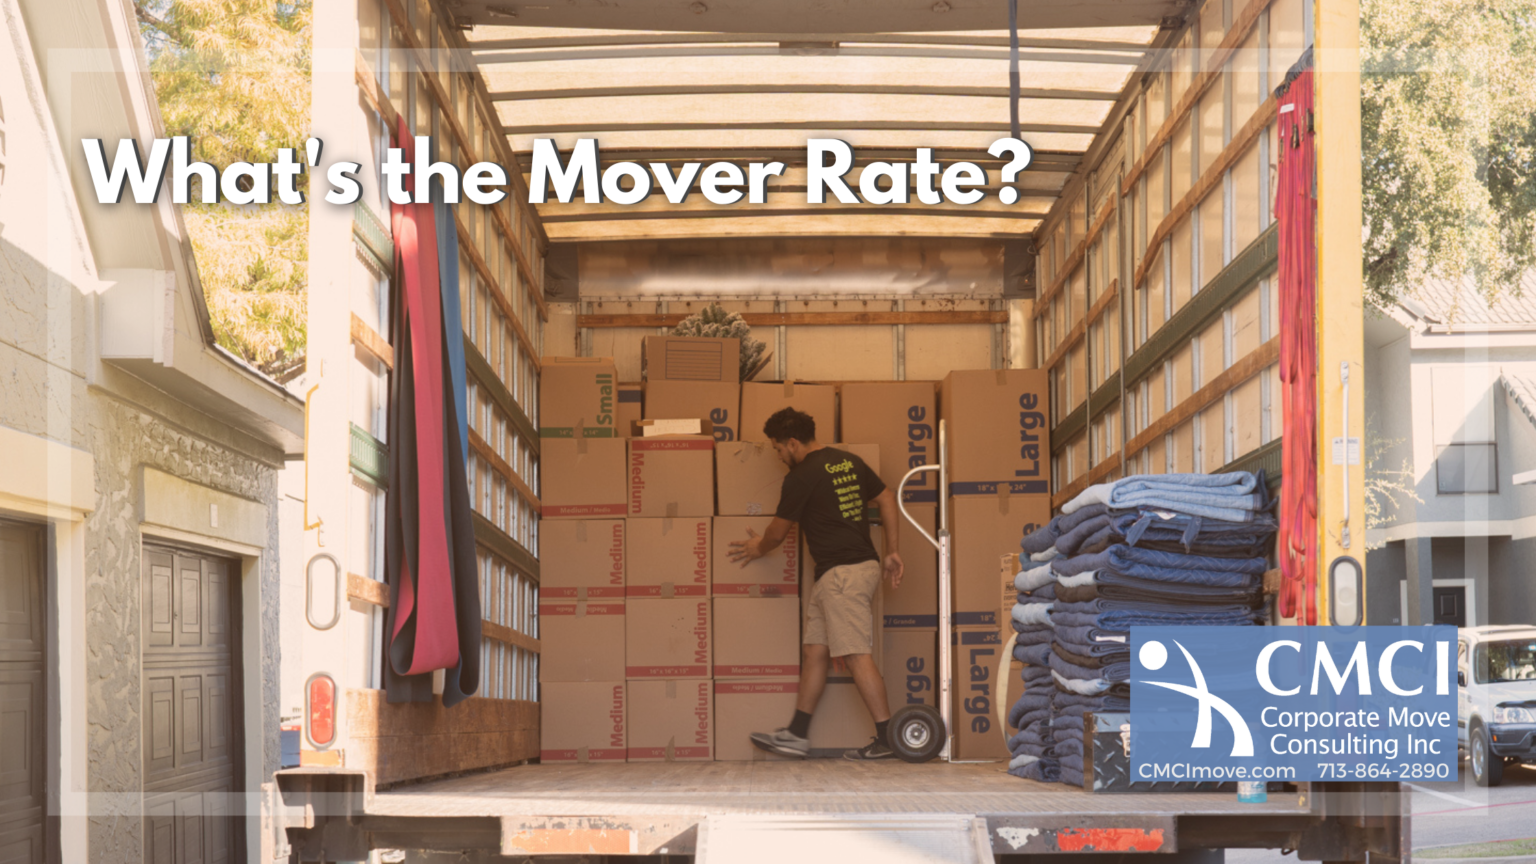 What’s the Mover Rate? - Corporate Move Consulting Inc (CMCI)